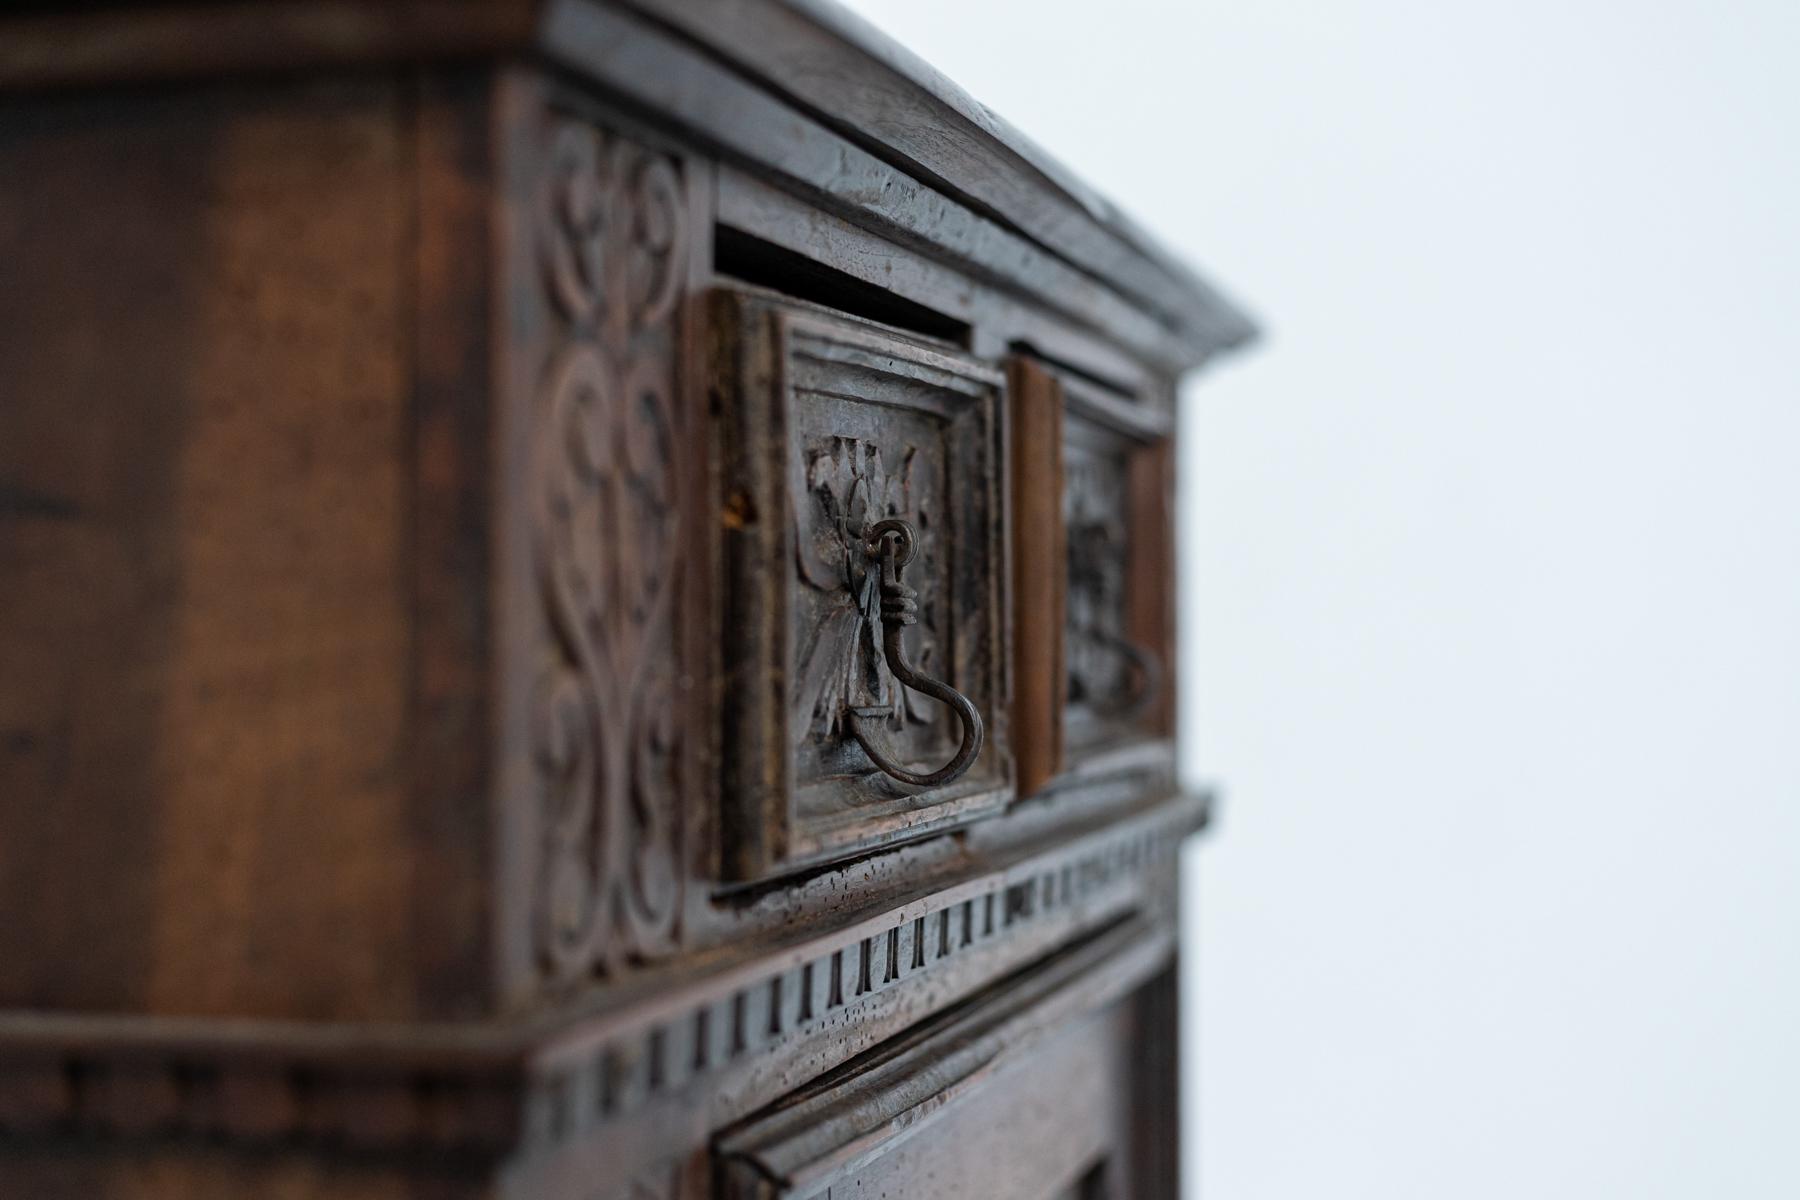 Antique Tuscan furniture from the late 16th, early 17th century of fine Italian manufacture, with splendid mastery of woodwork.
The cabinet is made entirely of walnut wood and features various decorations.
There are 4 feet supporting the structure